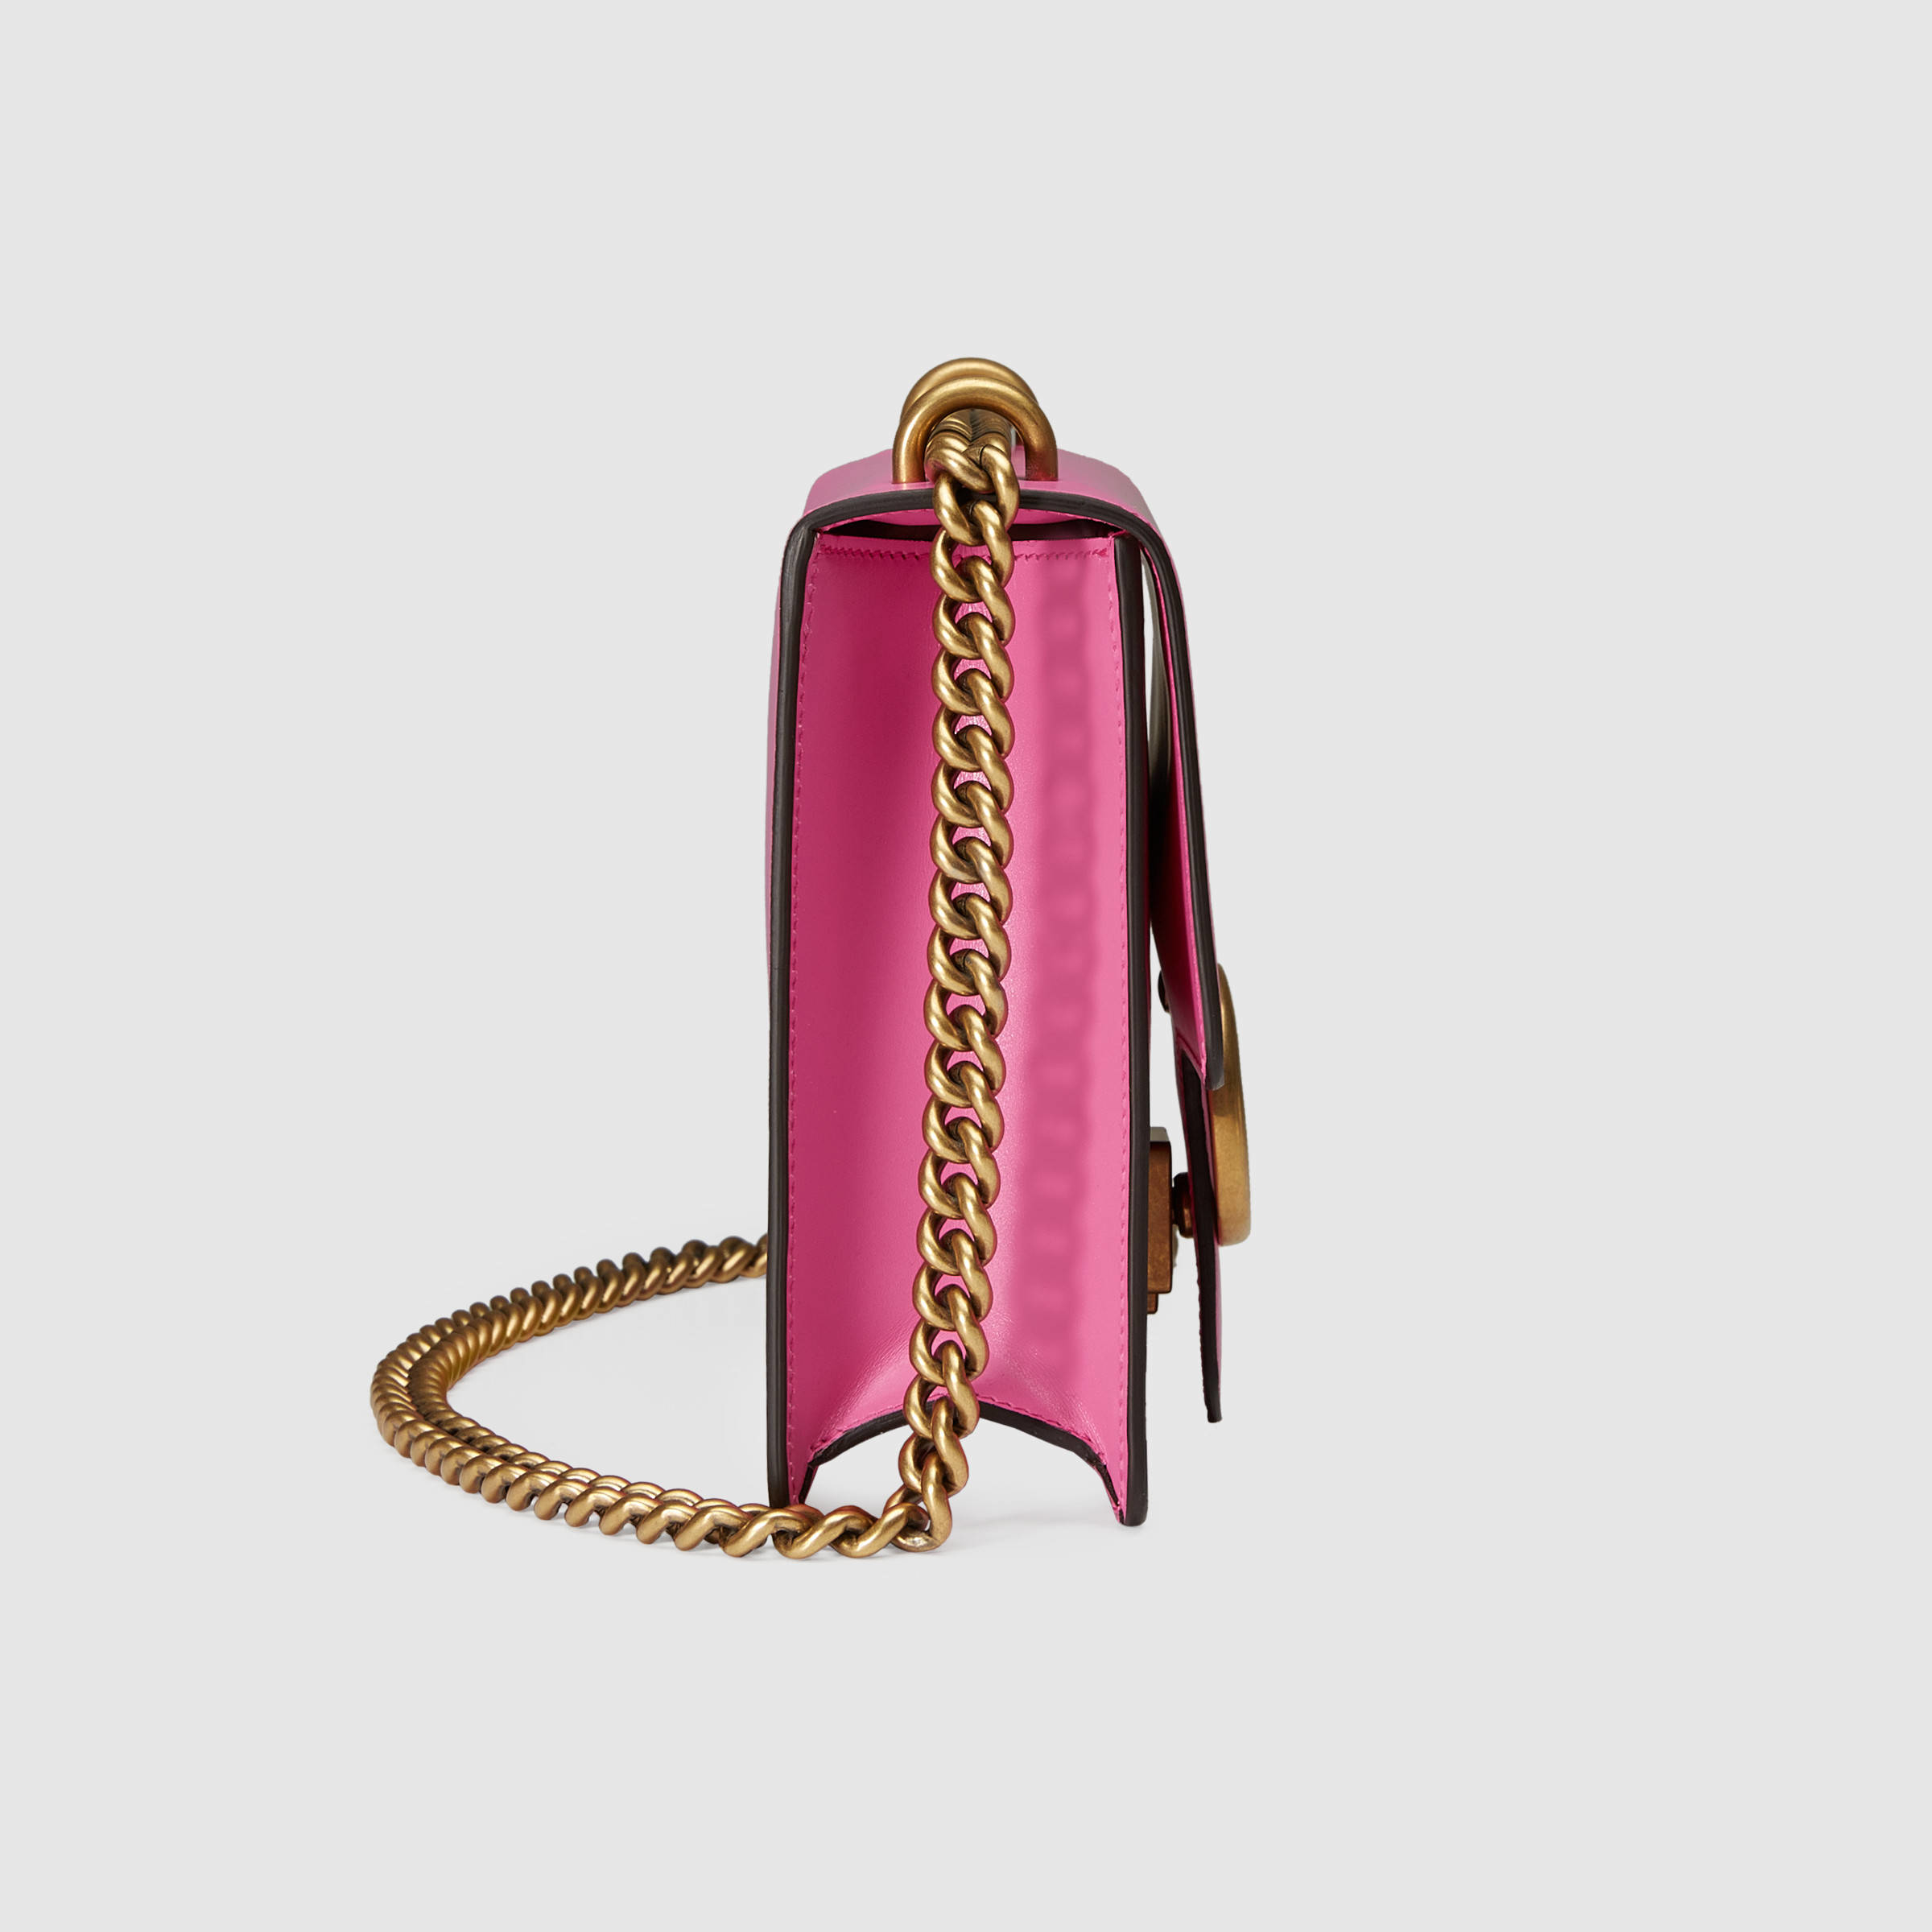 Lyst - Gucci GG Marmont Leather Shoulder Bag in Pink